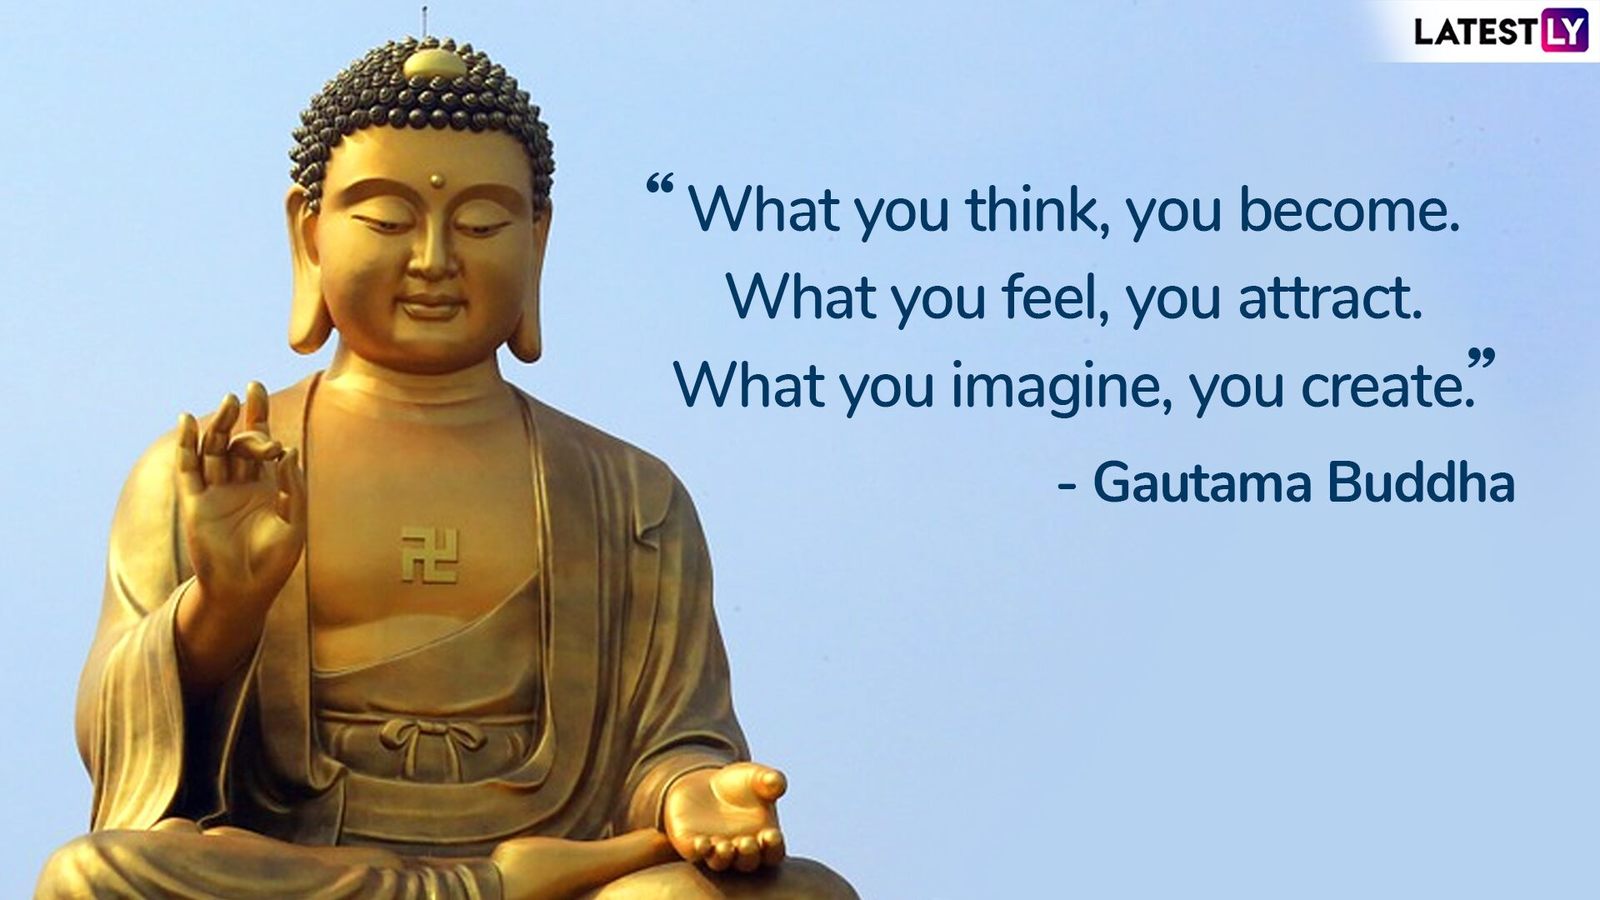 9-quotes-and-messages-share-these-inspirational-teachings-by-lord-buddha-to-celebrate-latestly-6.jpg